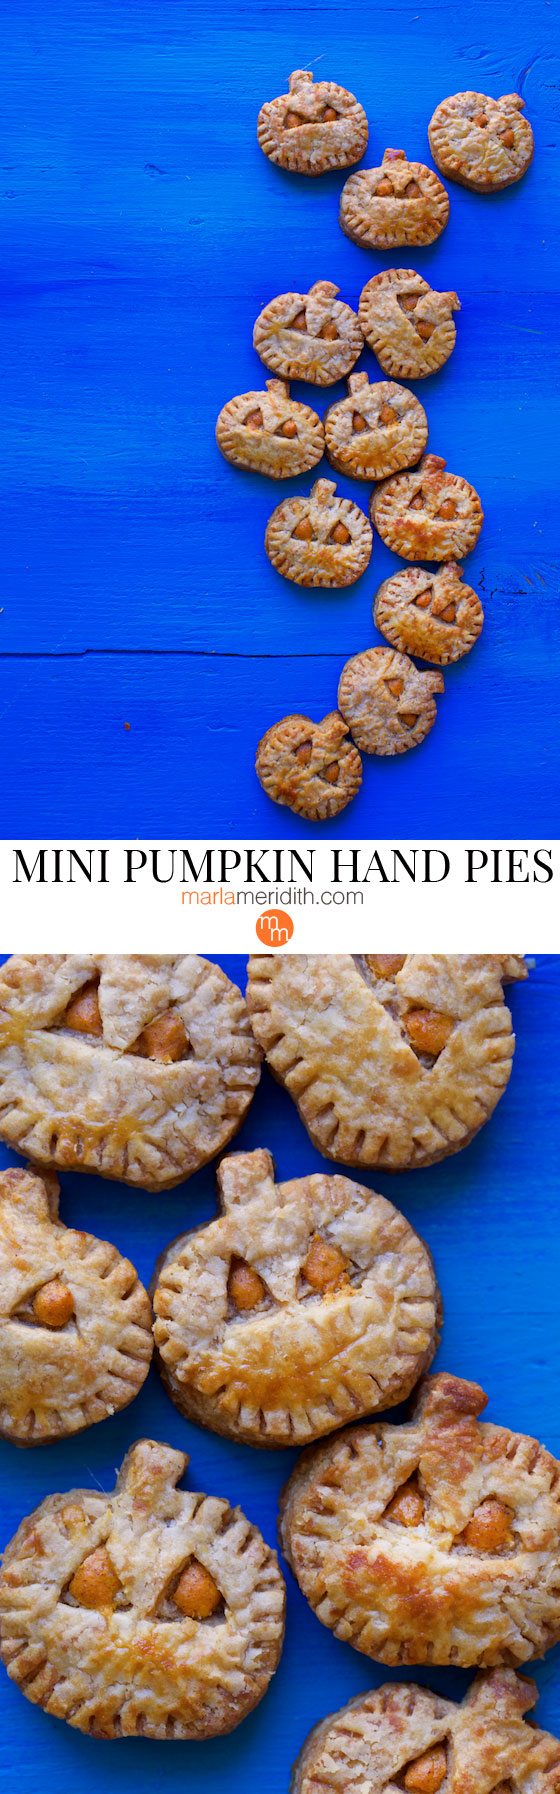 These Mini Pumpkin Spice Hand Pies are perfect for breakfast, coffee time & the holidays! MarlaMeridith.com ( @marlameridith )#recipe #baking #pumpkin